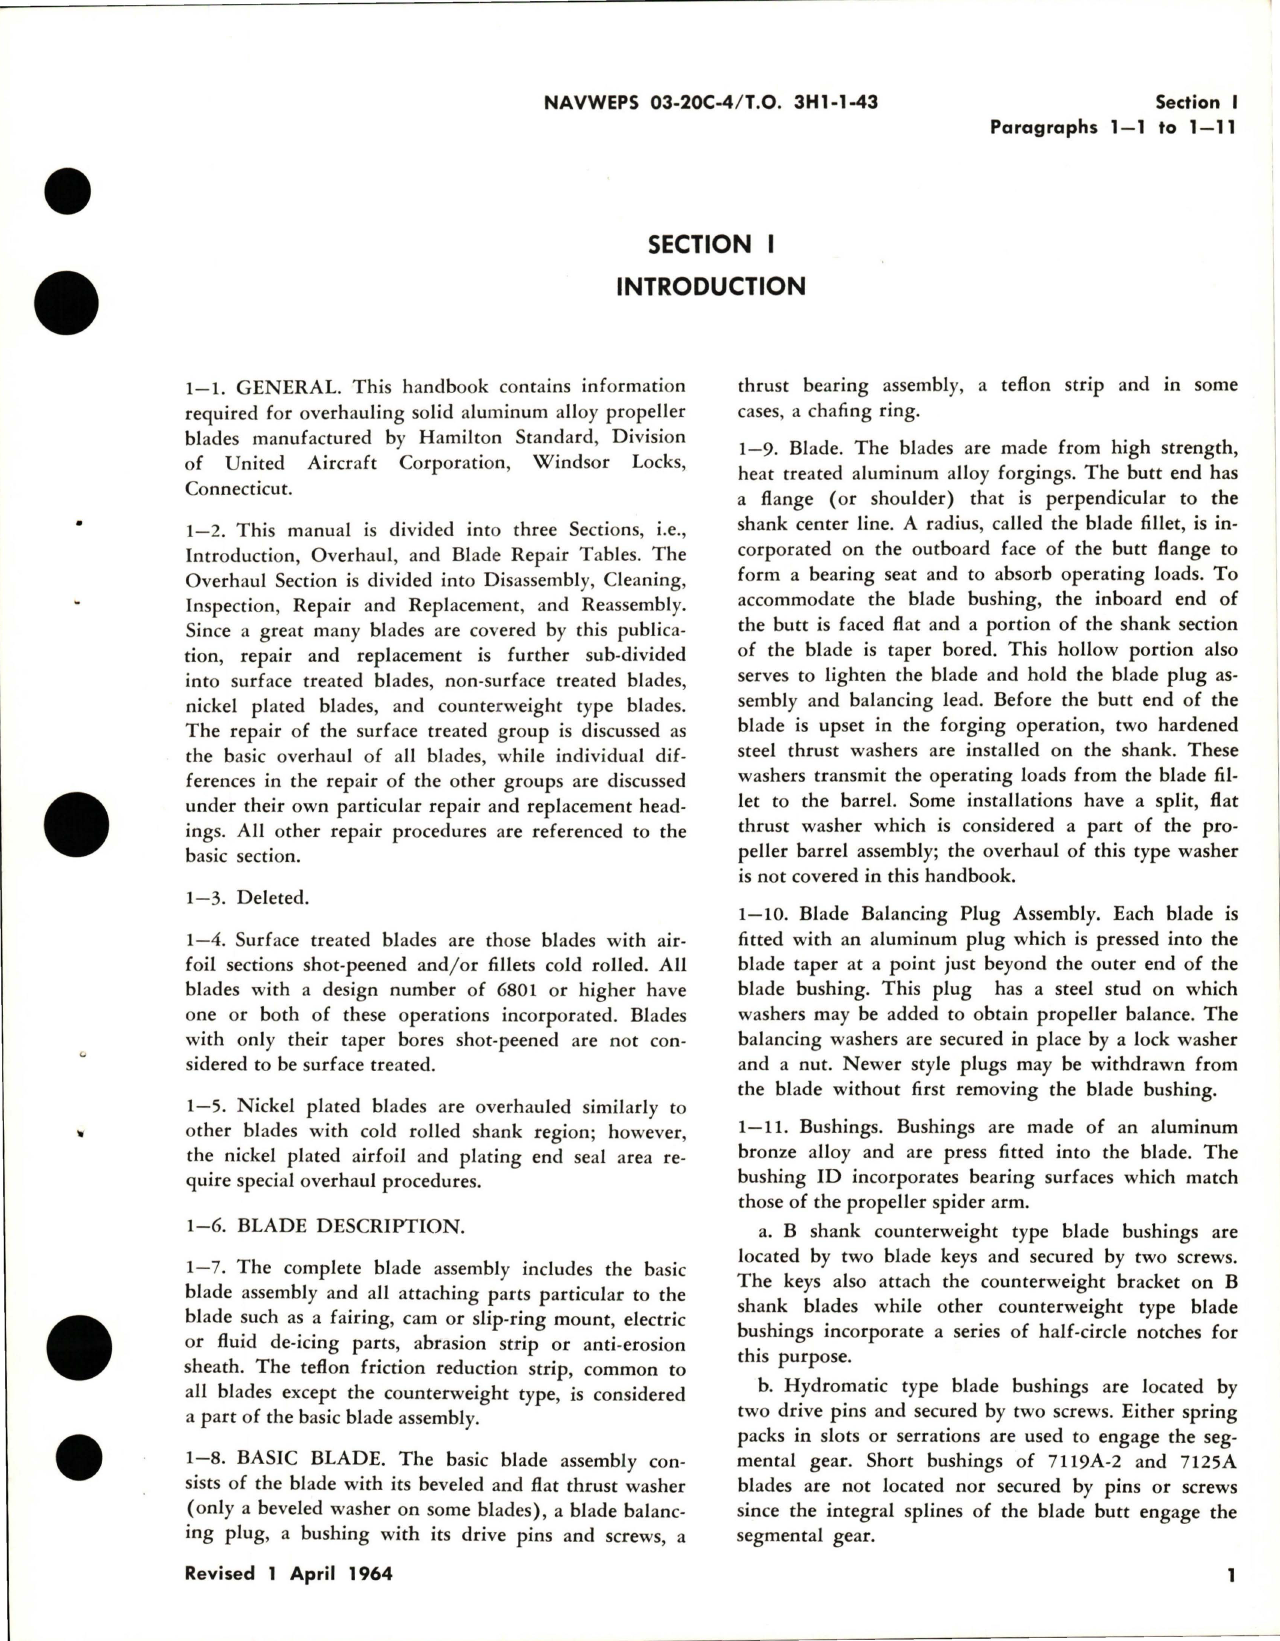 Sample page 7 from AirCorps Library document: Overhaul Instructions for Aluminum Alloy Propeller Blades